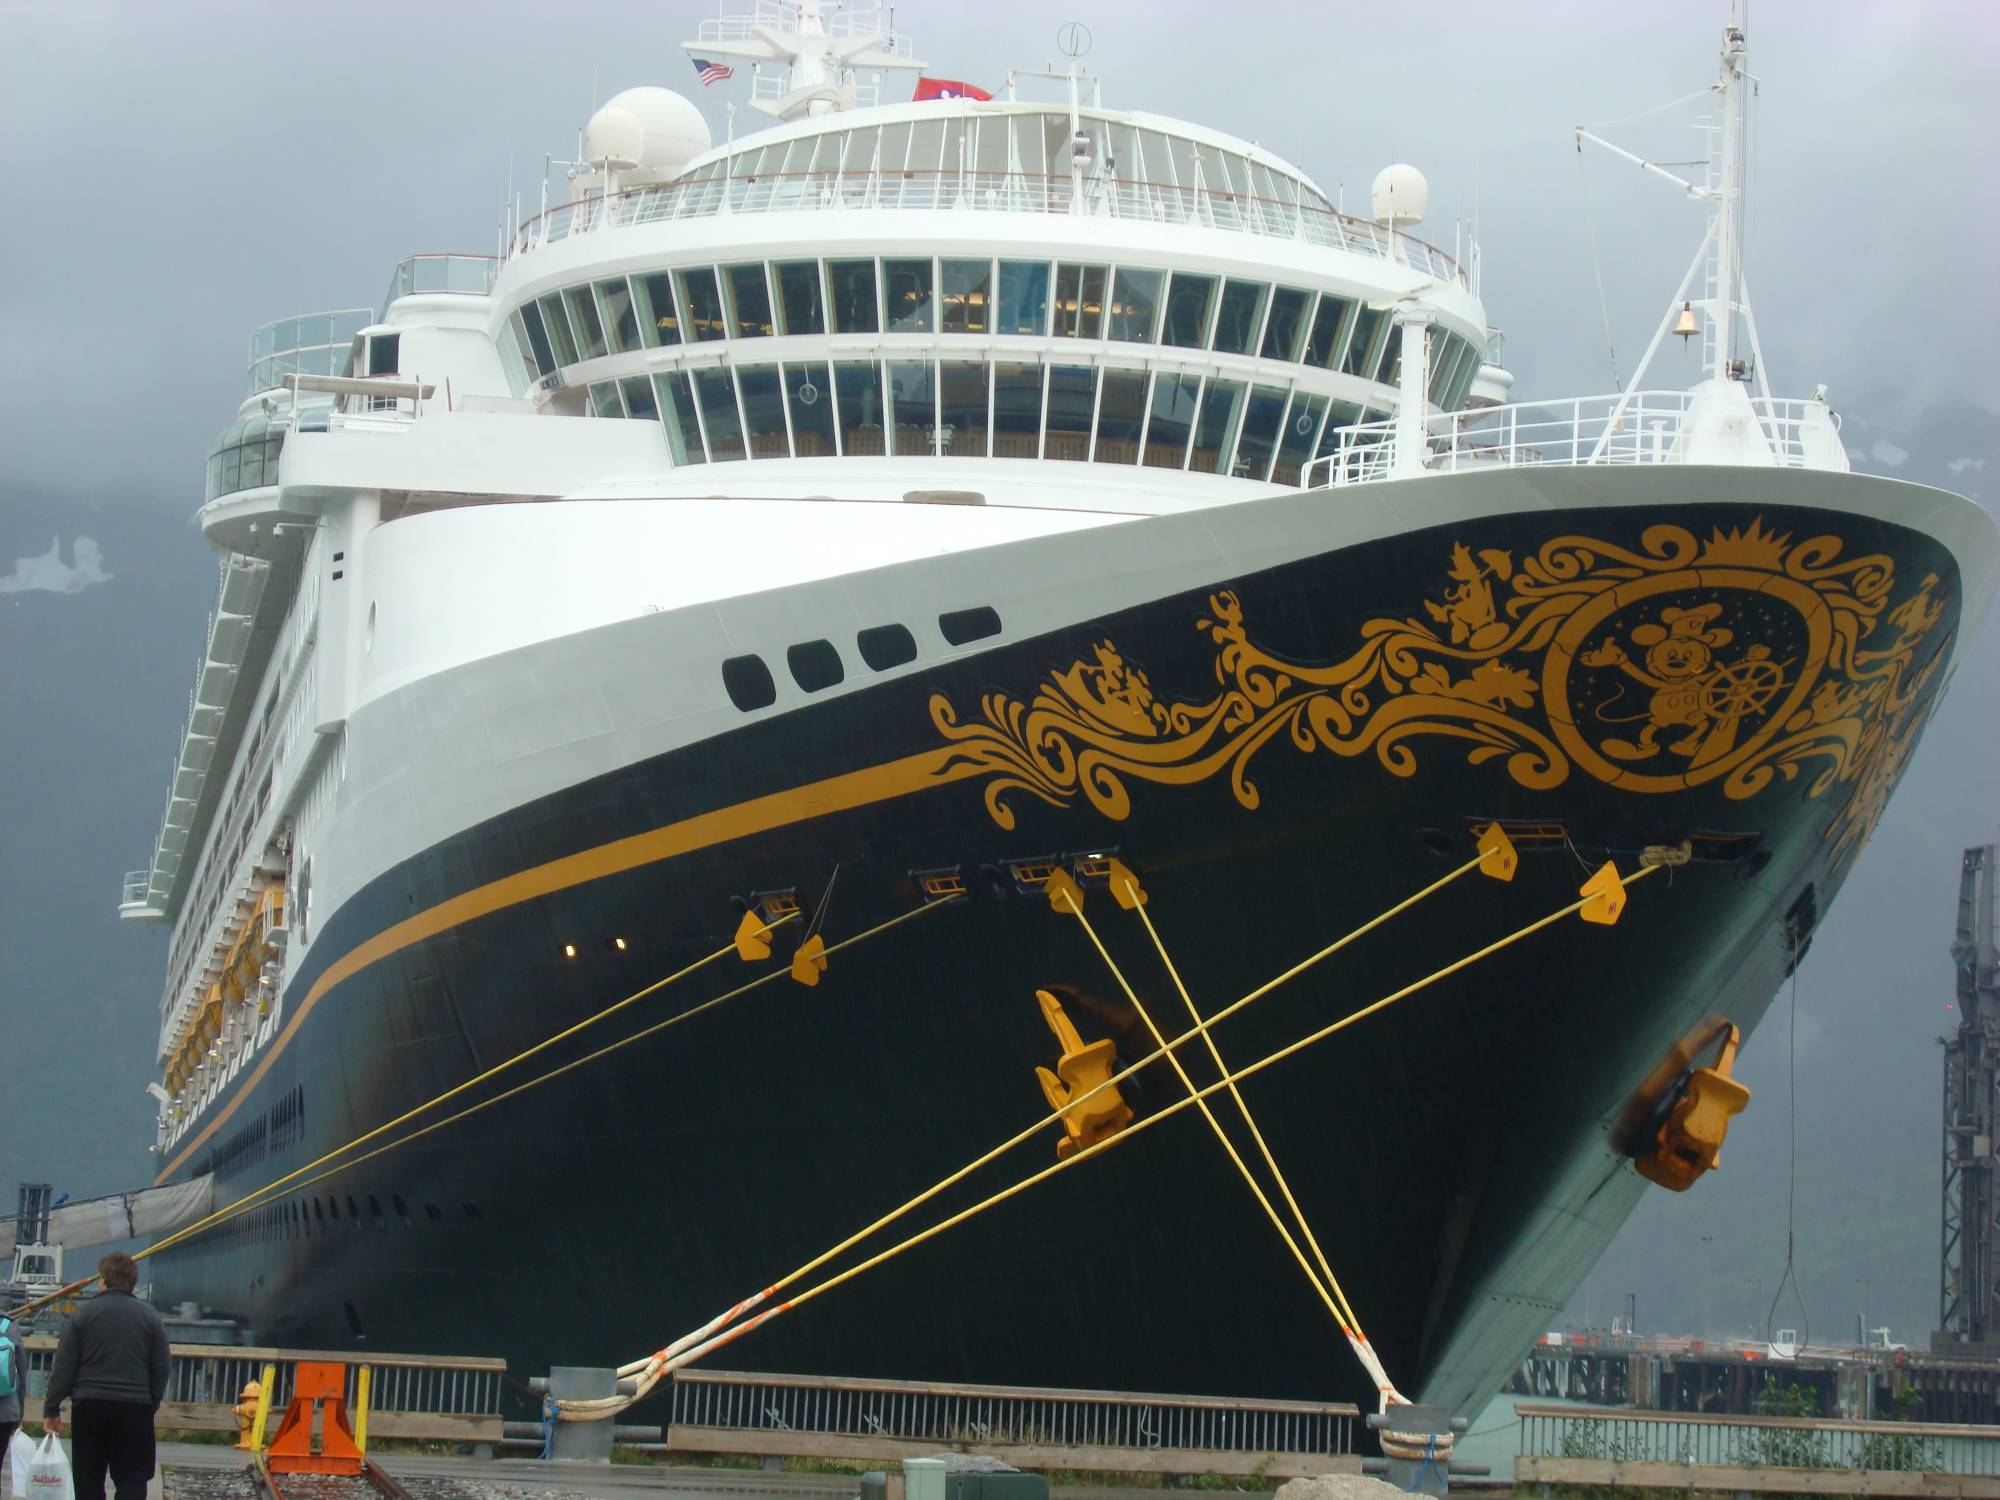 Learn more about what to do onboard the Disney Cruise Line | PassPorter.com